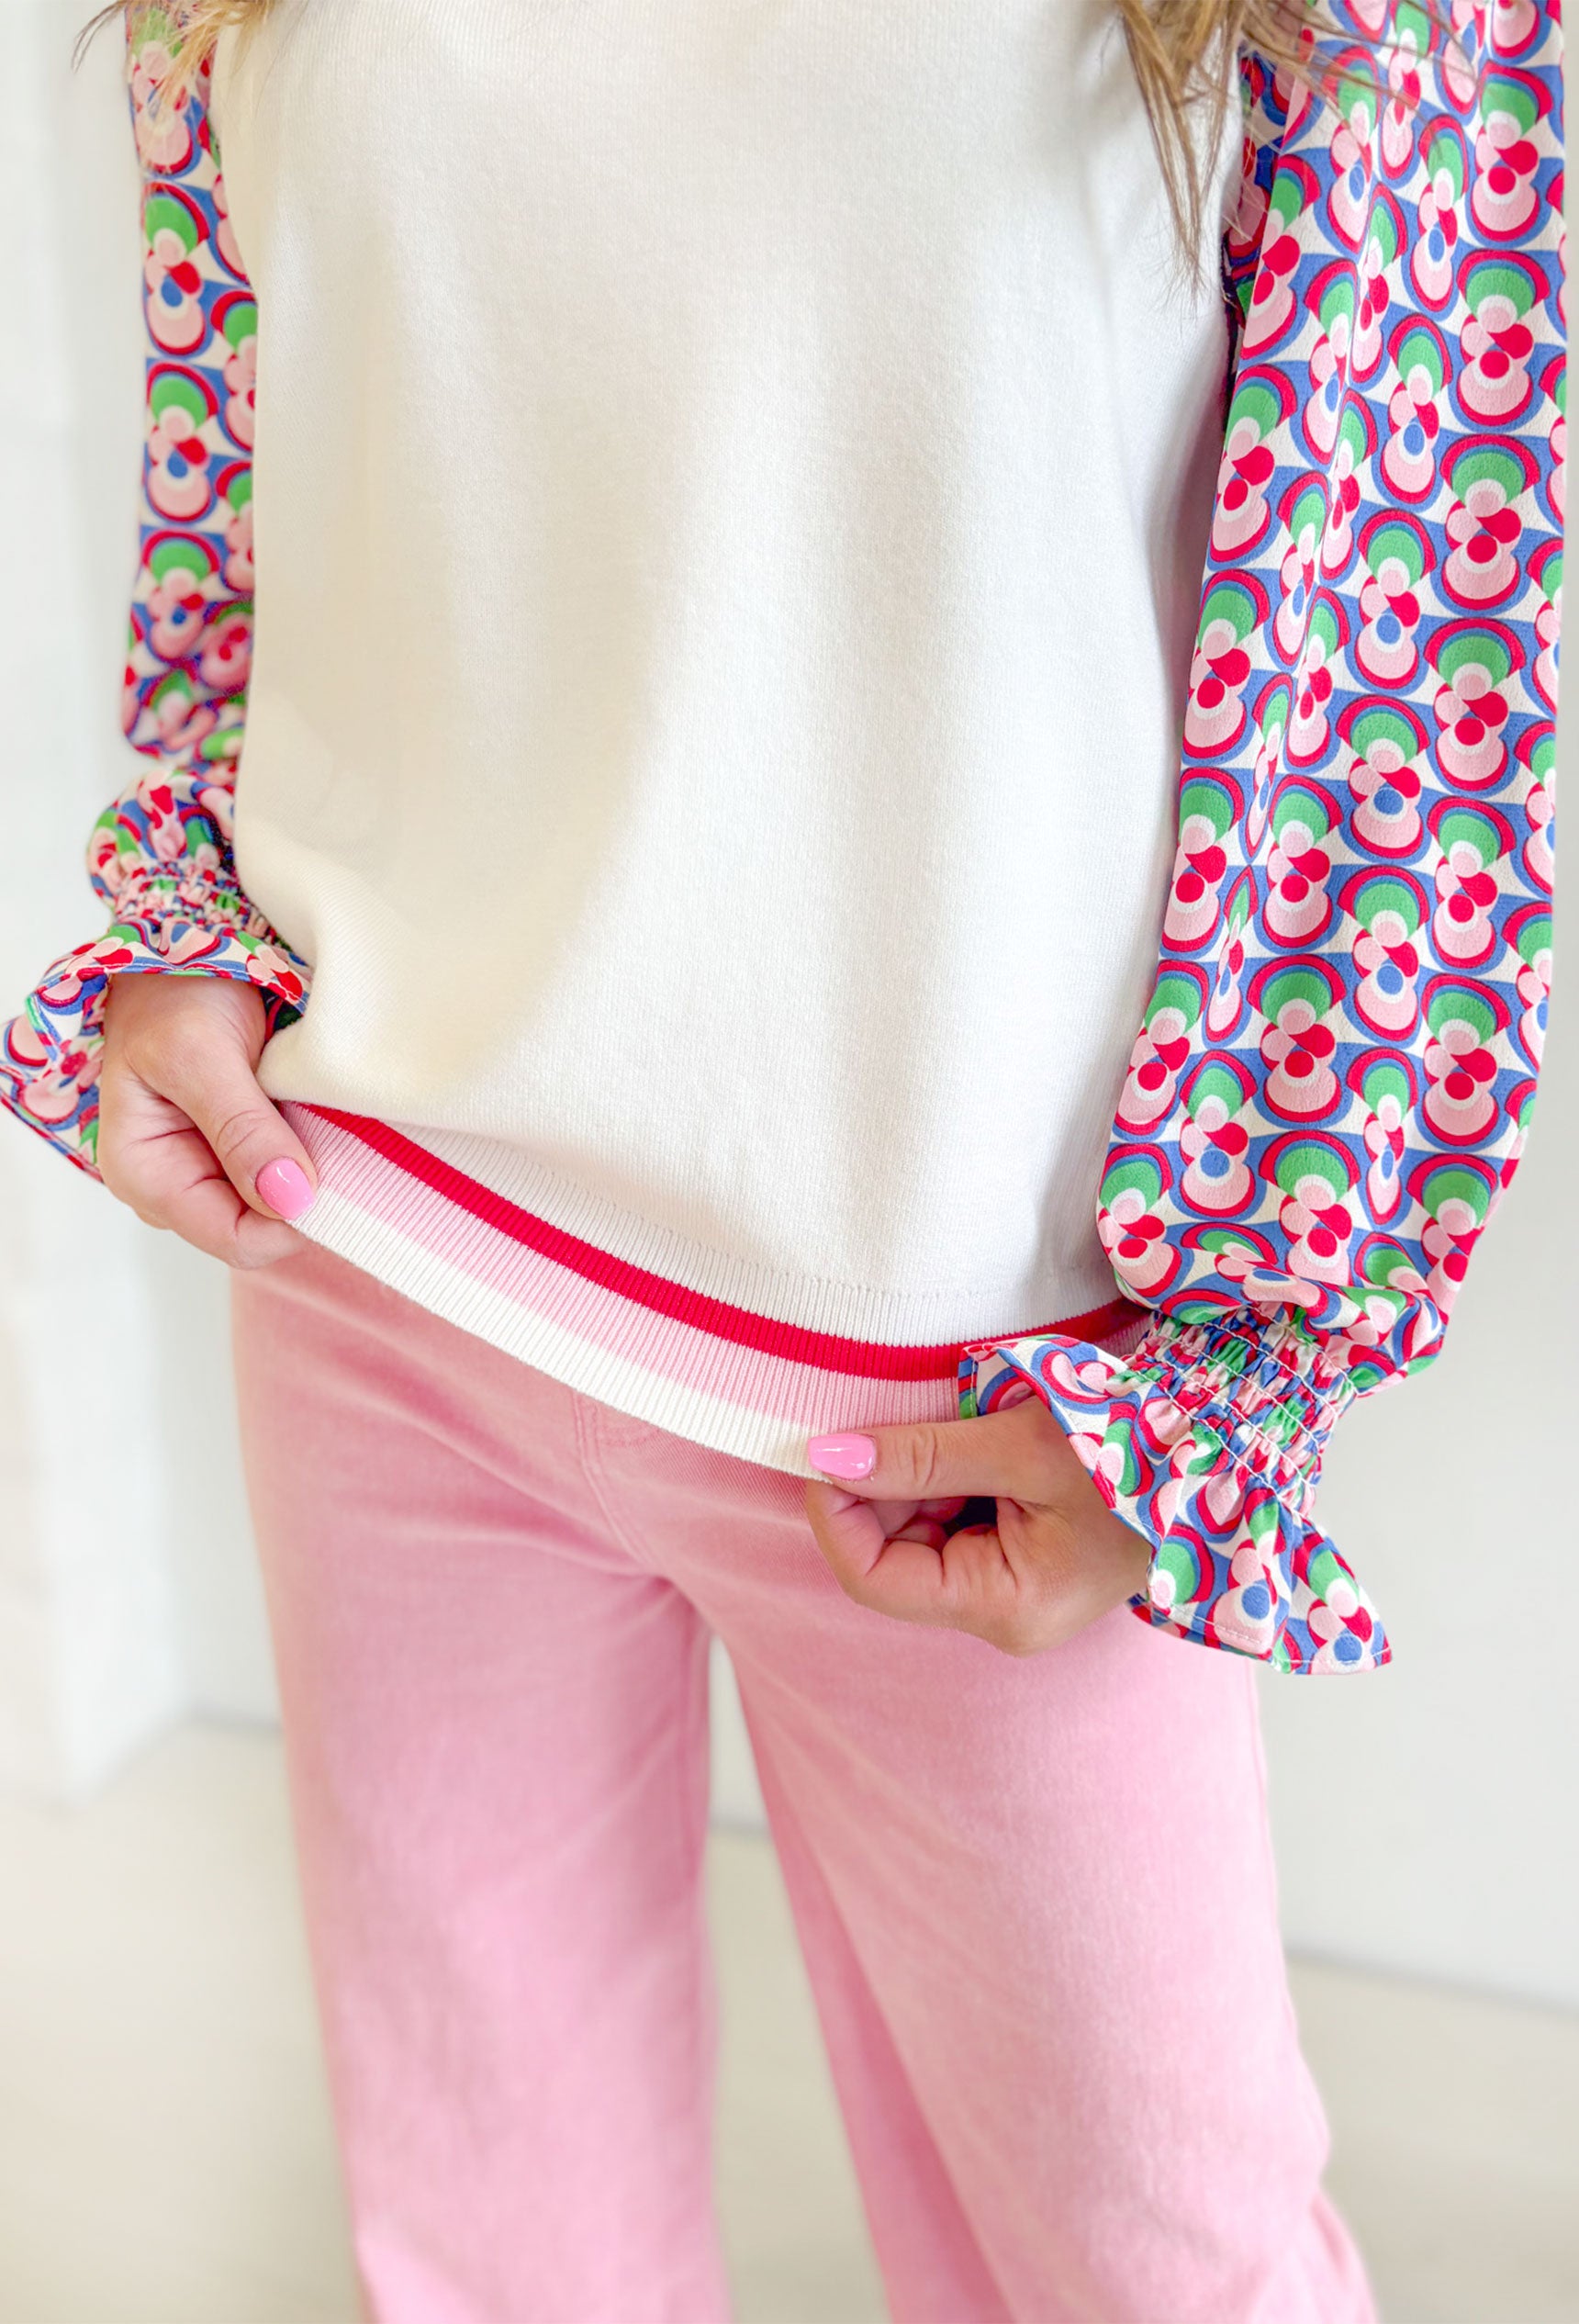 Gather The Courage Top, white sweater top with thin patterned sleeves in the colors red, pink. green, white, and blue